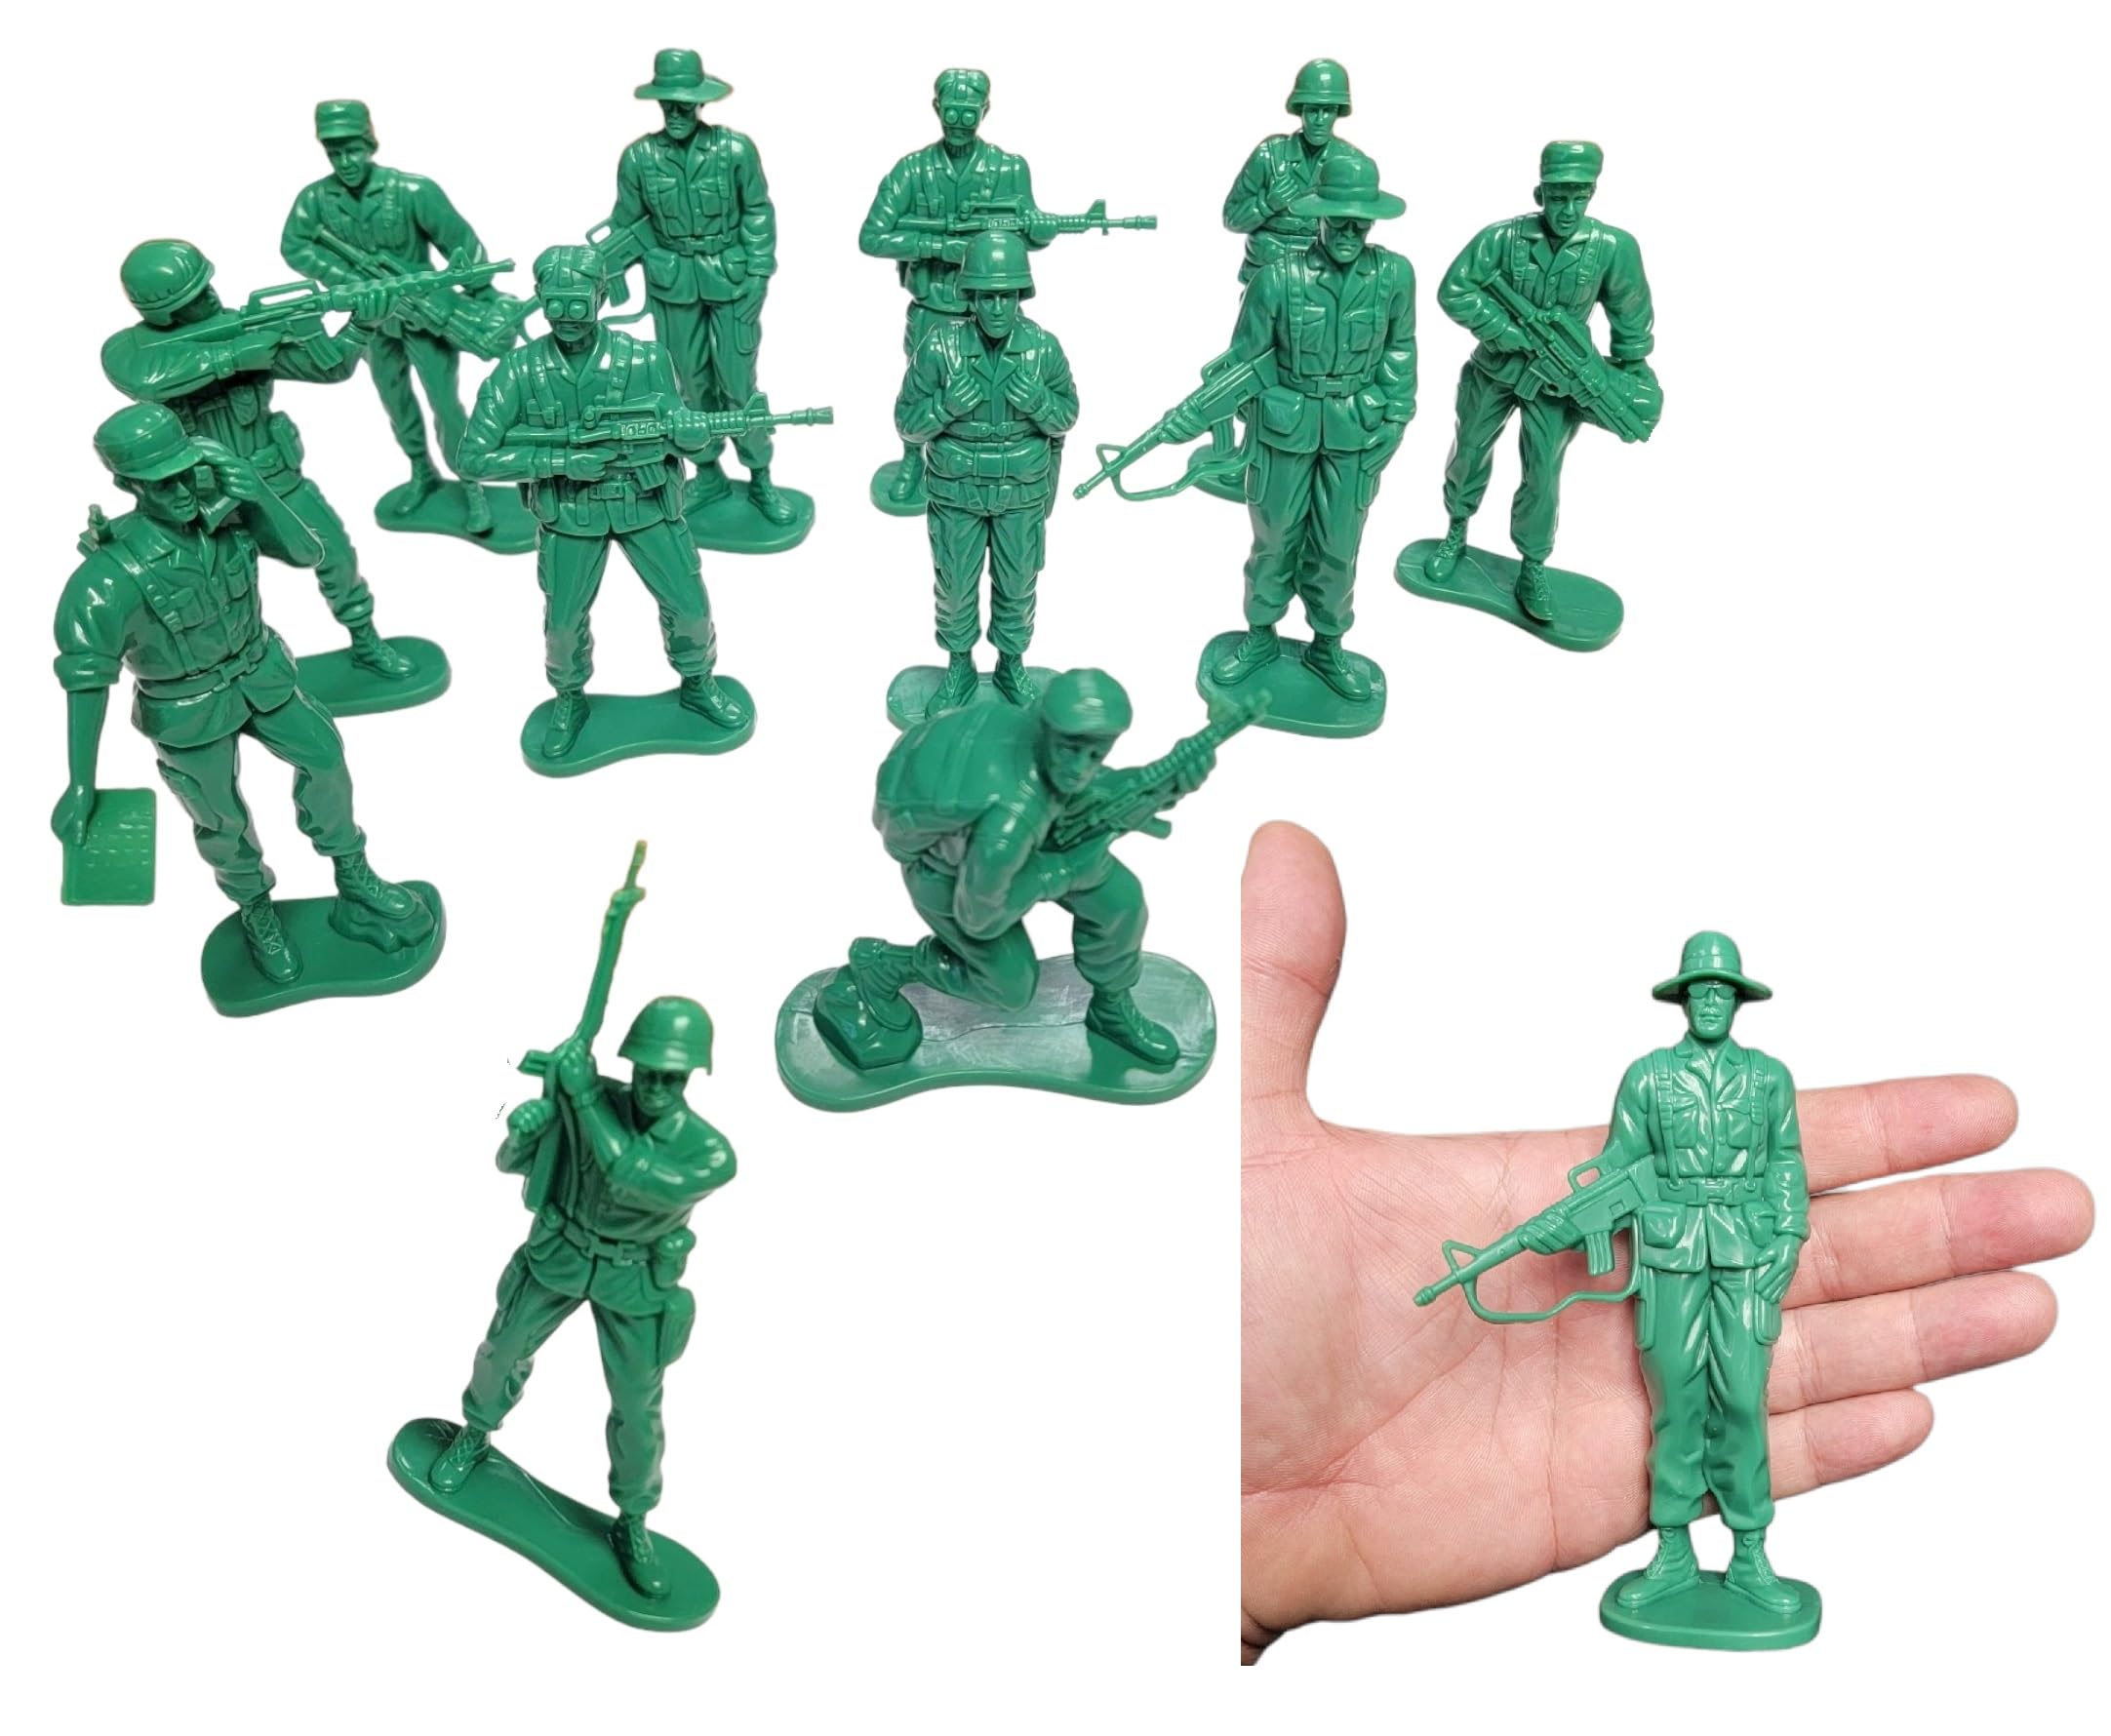 soldiers action figures